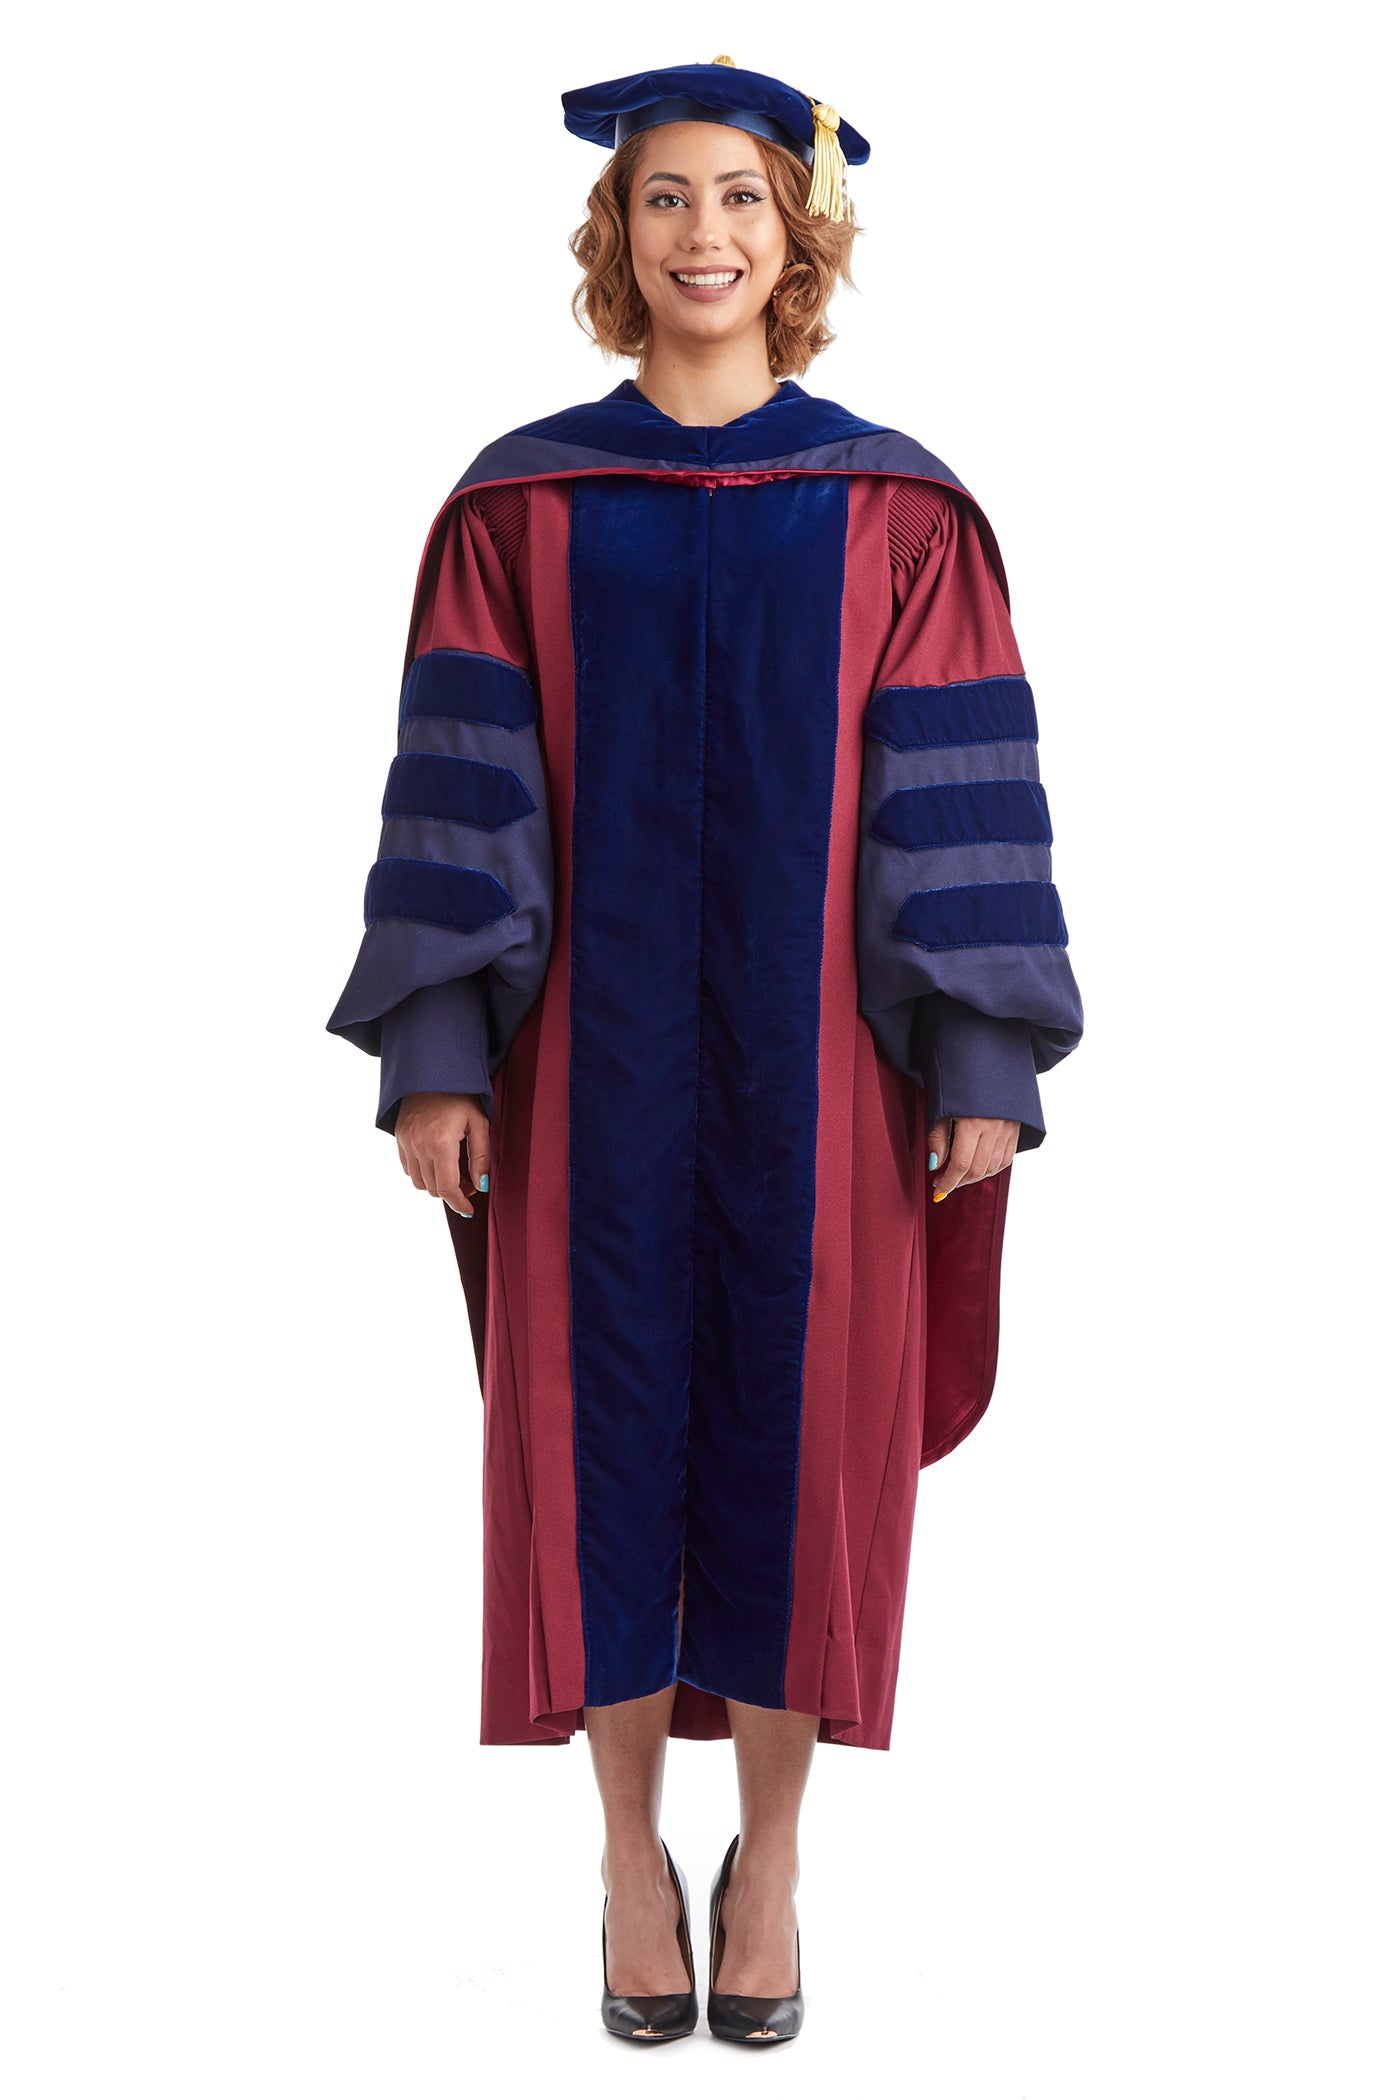 Buy Graduation Gown Sets UK | Graduation Gowns, Hoods, Caps, Gifts and  Frames